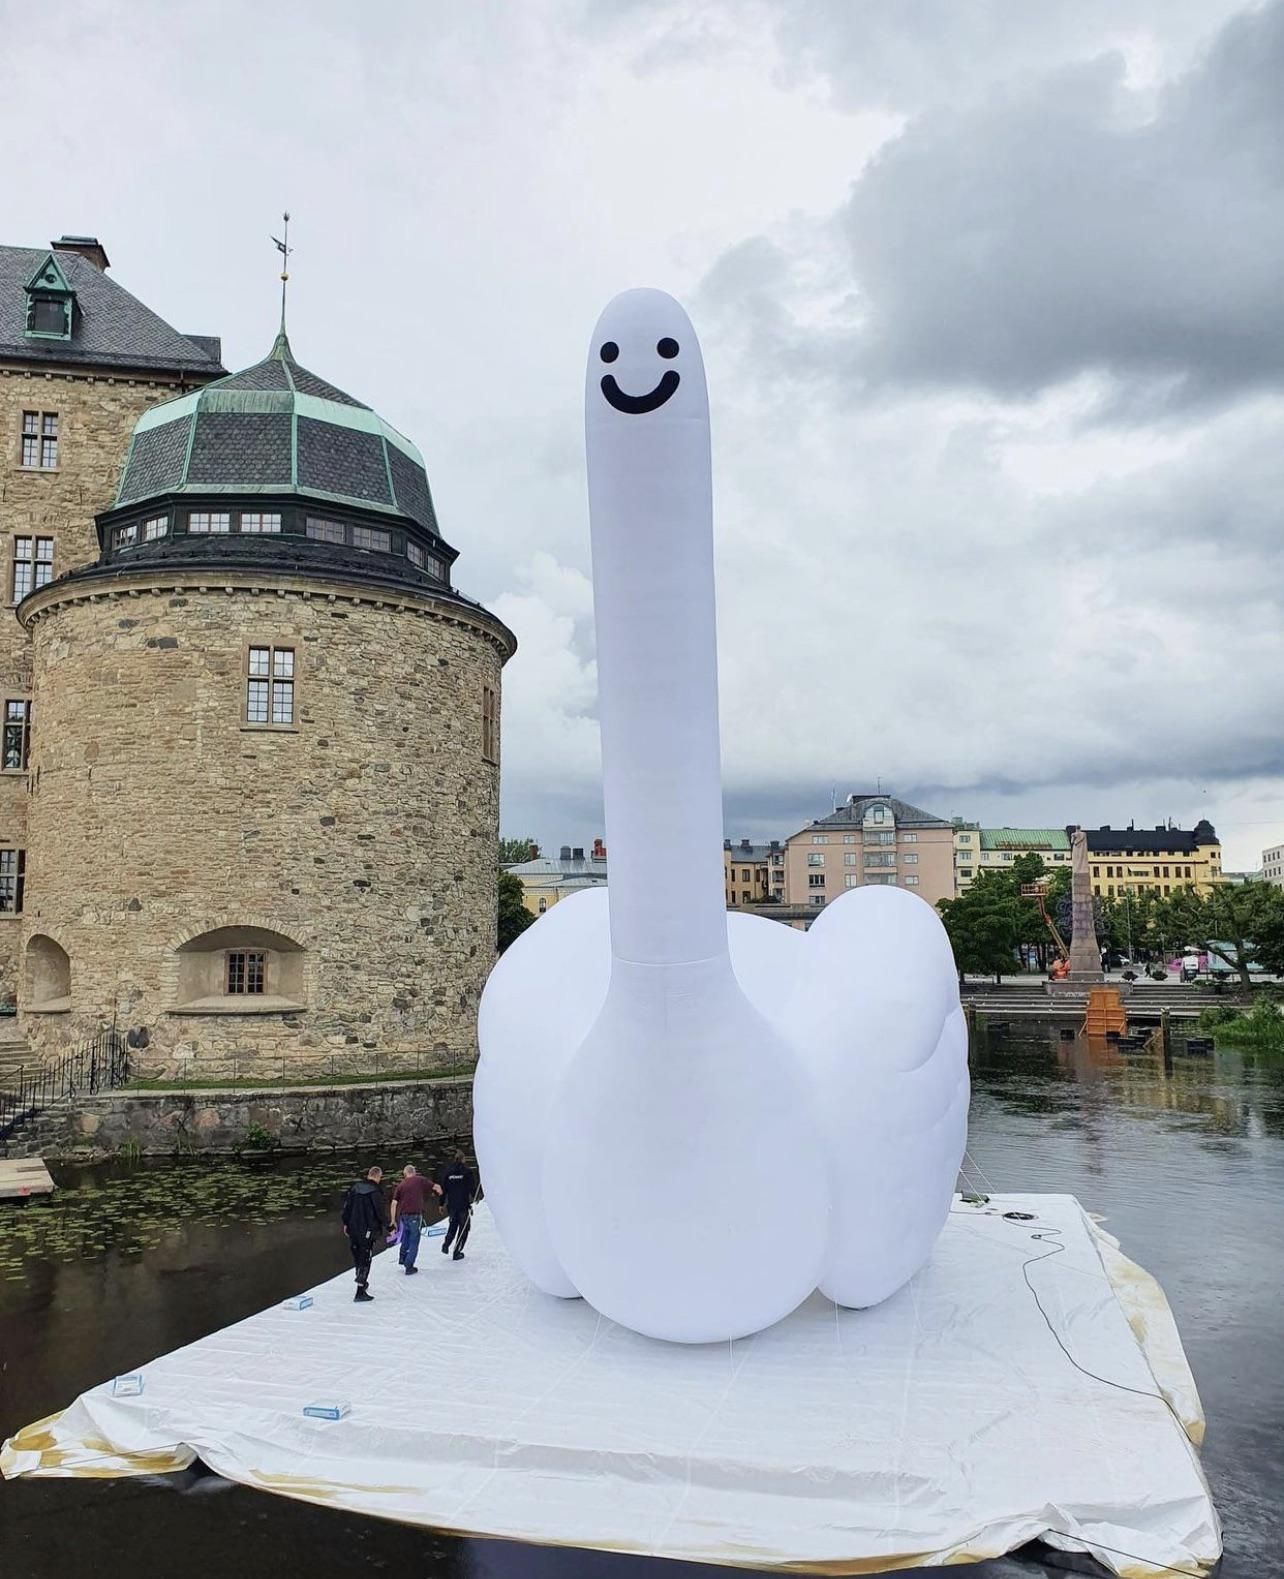 There is currently an art exhibition in my home town Örebro, Sweden. This is one of the installations. Castle for reference.